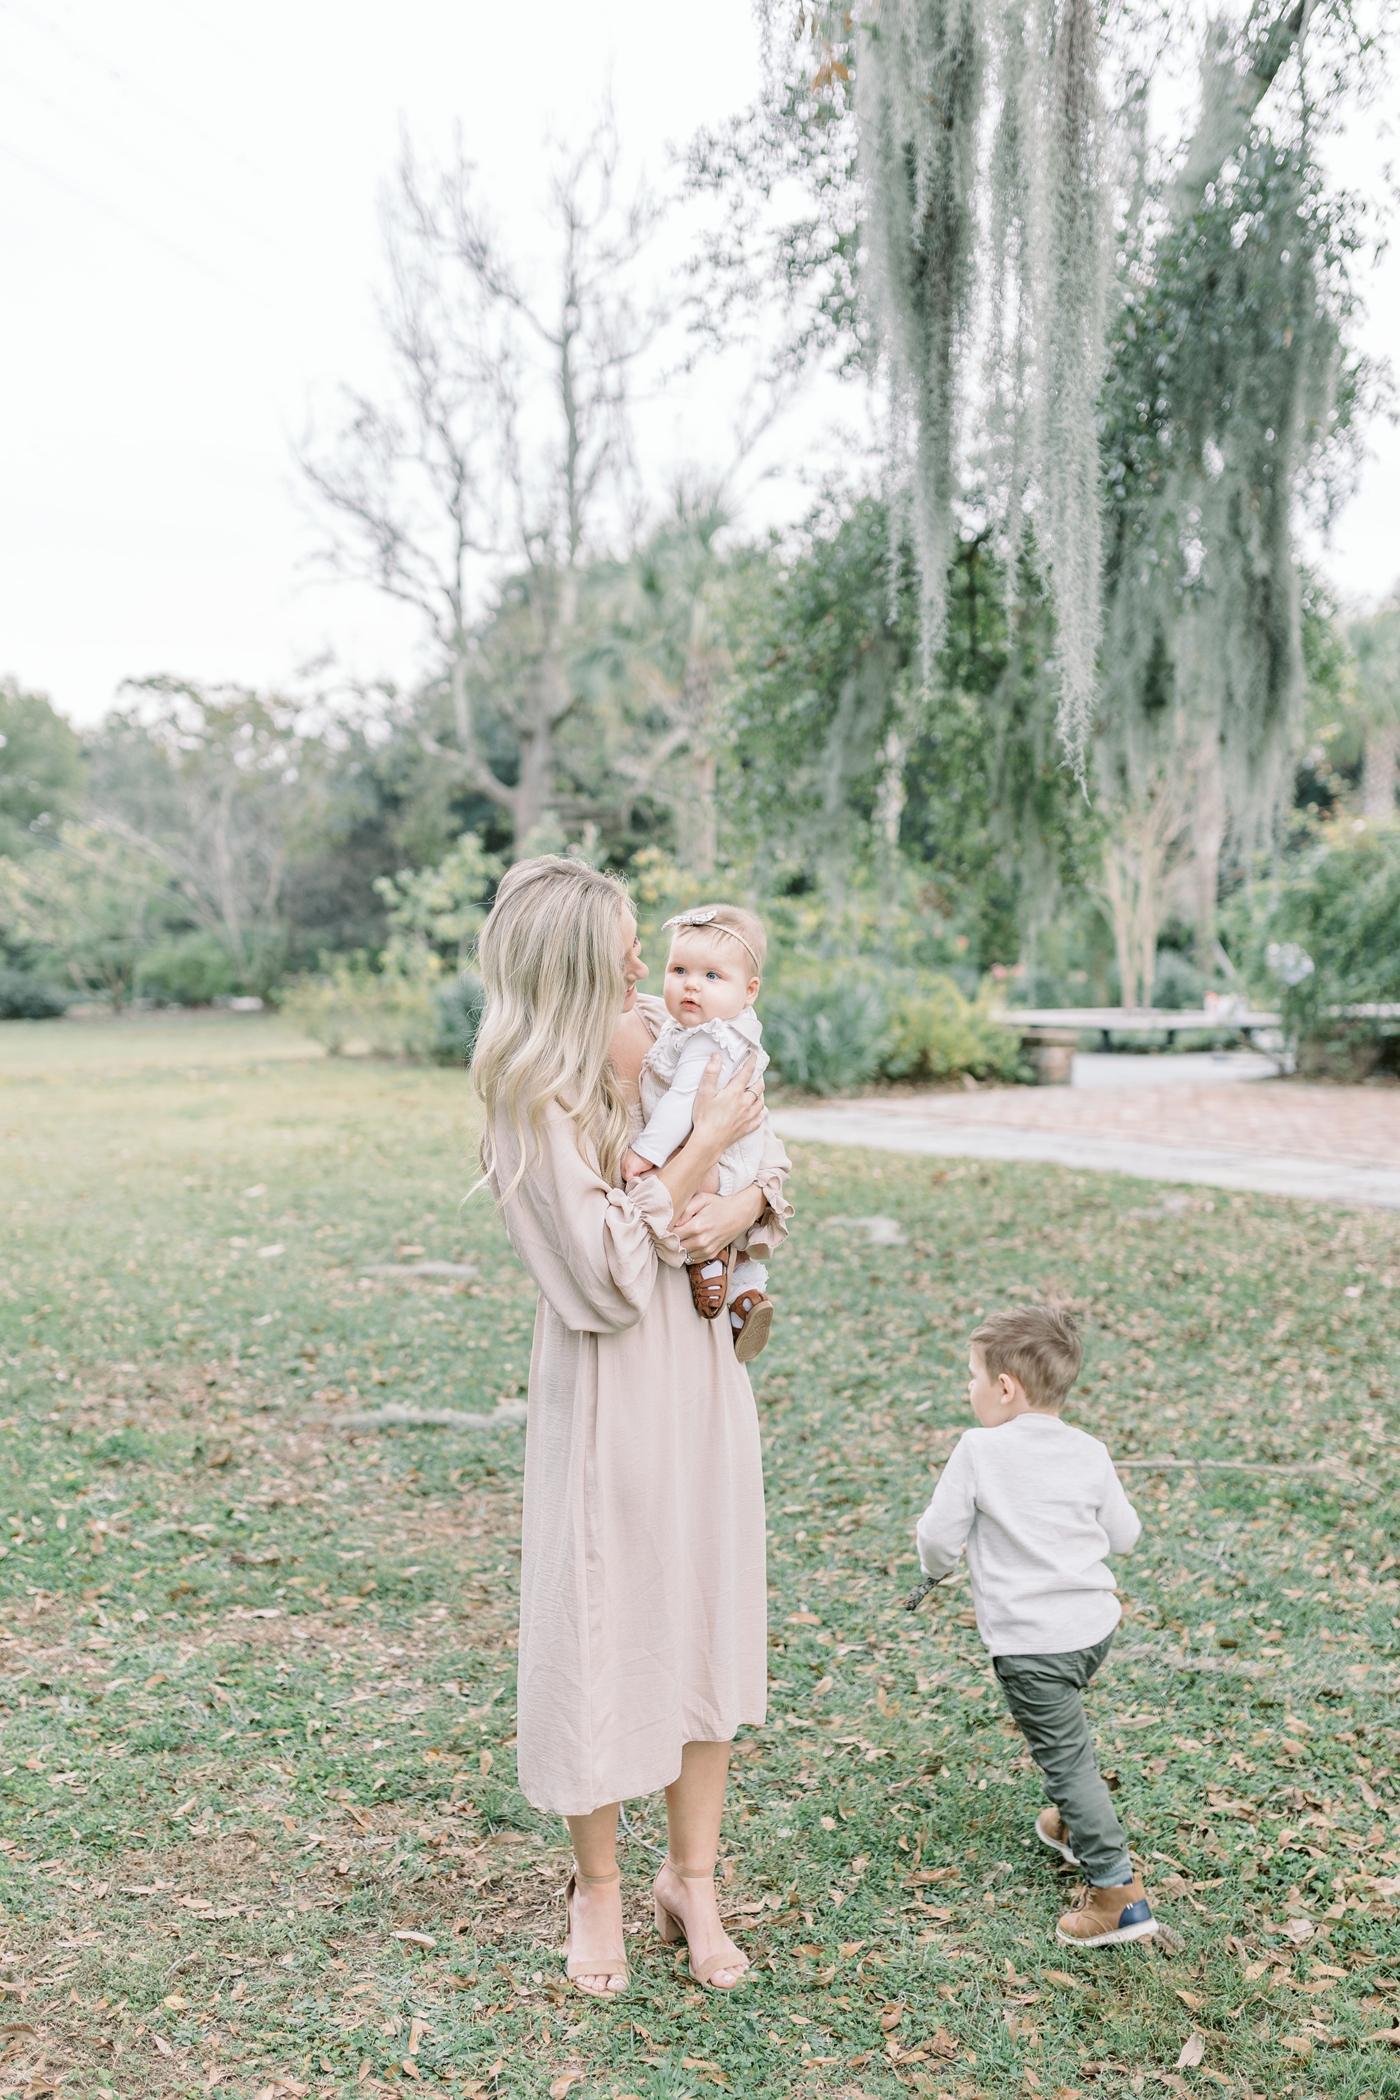 Mom holding baby while big brother plays next to them. Photo by Charleston SC family photographer, Caitlyn Motycka Photography.